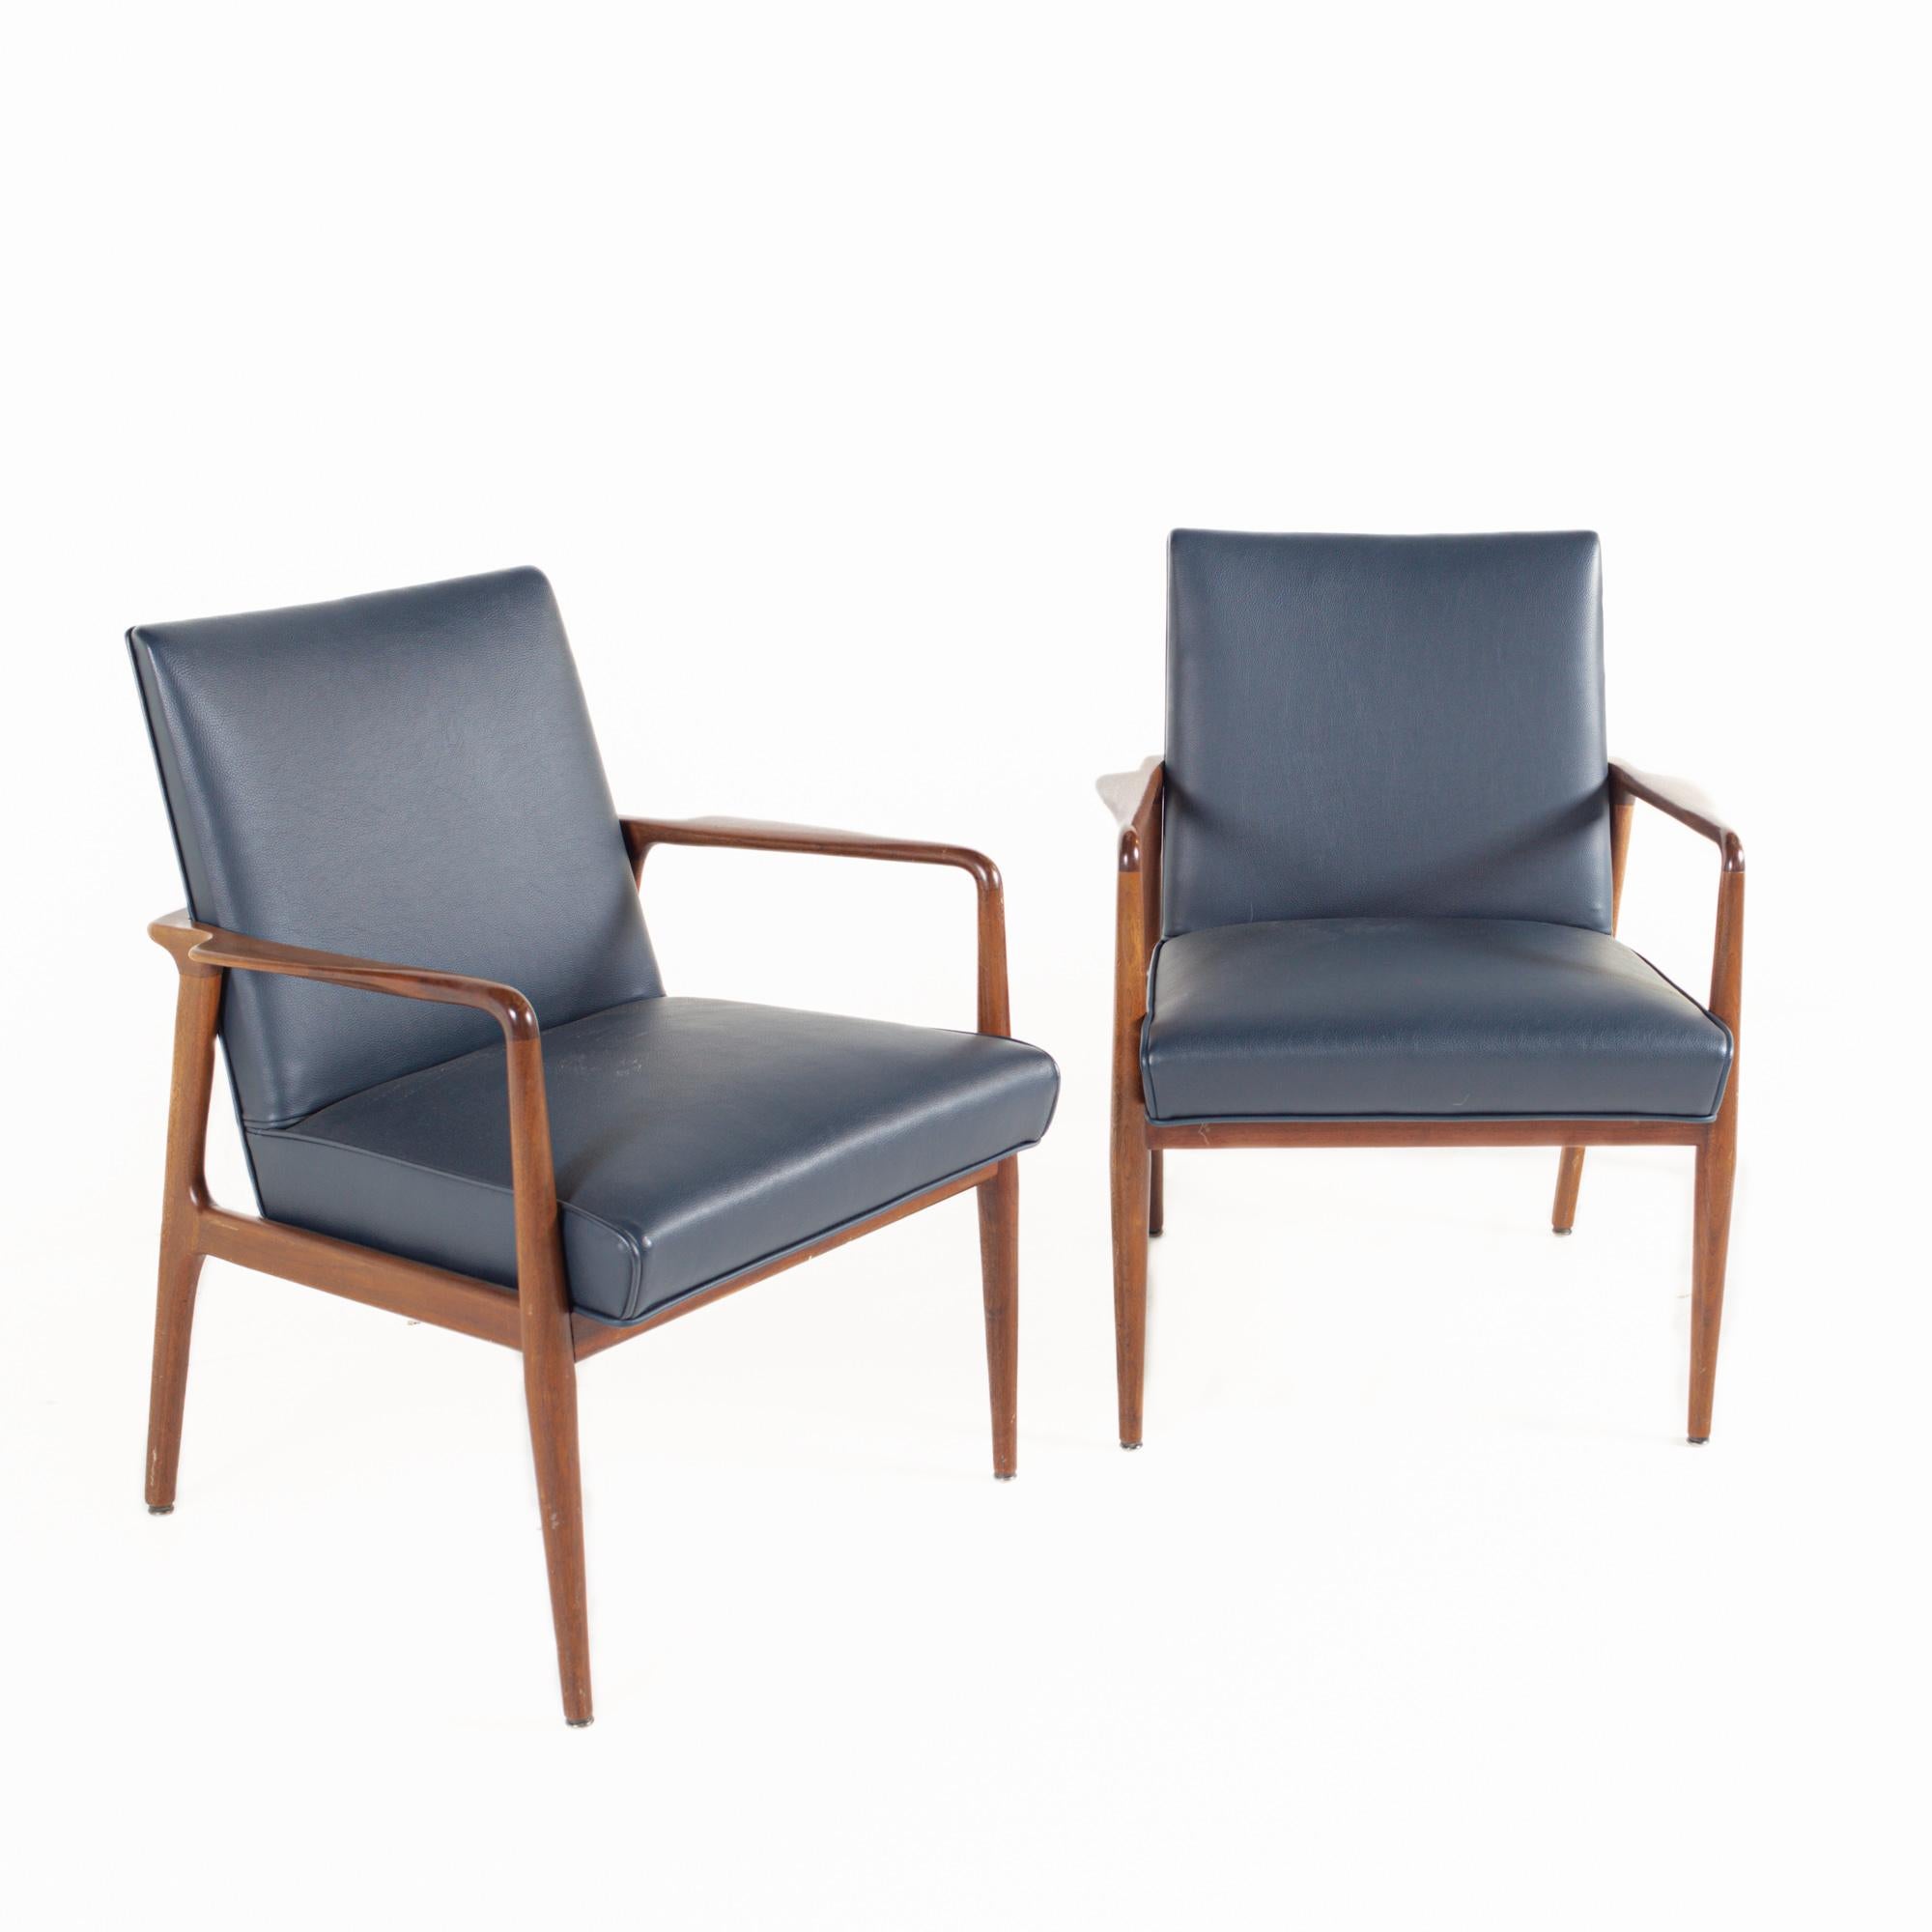 Stow Davis Mid Century Lounge Chairs - Pair

Each lounge chair measures: 25.25 wide x 28 deep x 32.75 high, with a seat height of 18 and arm height/chair clearance 24.75 inches

All pieces of furniture can be had in what we call restored vintage